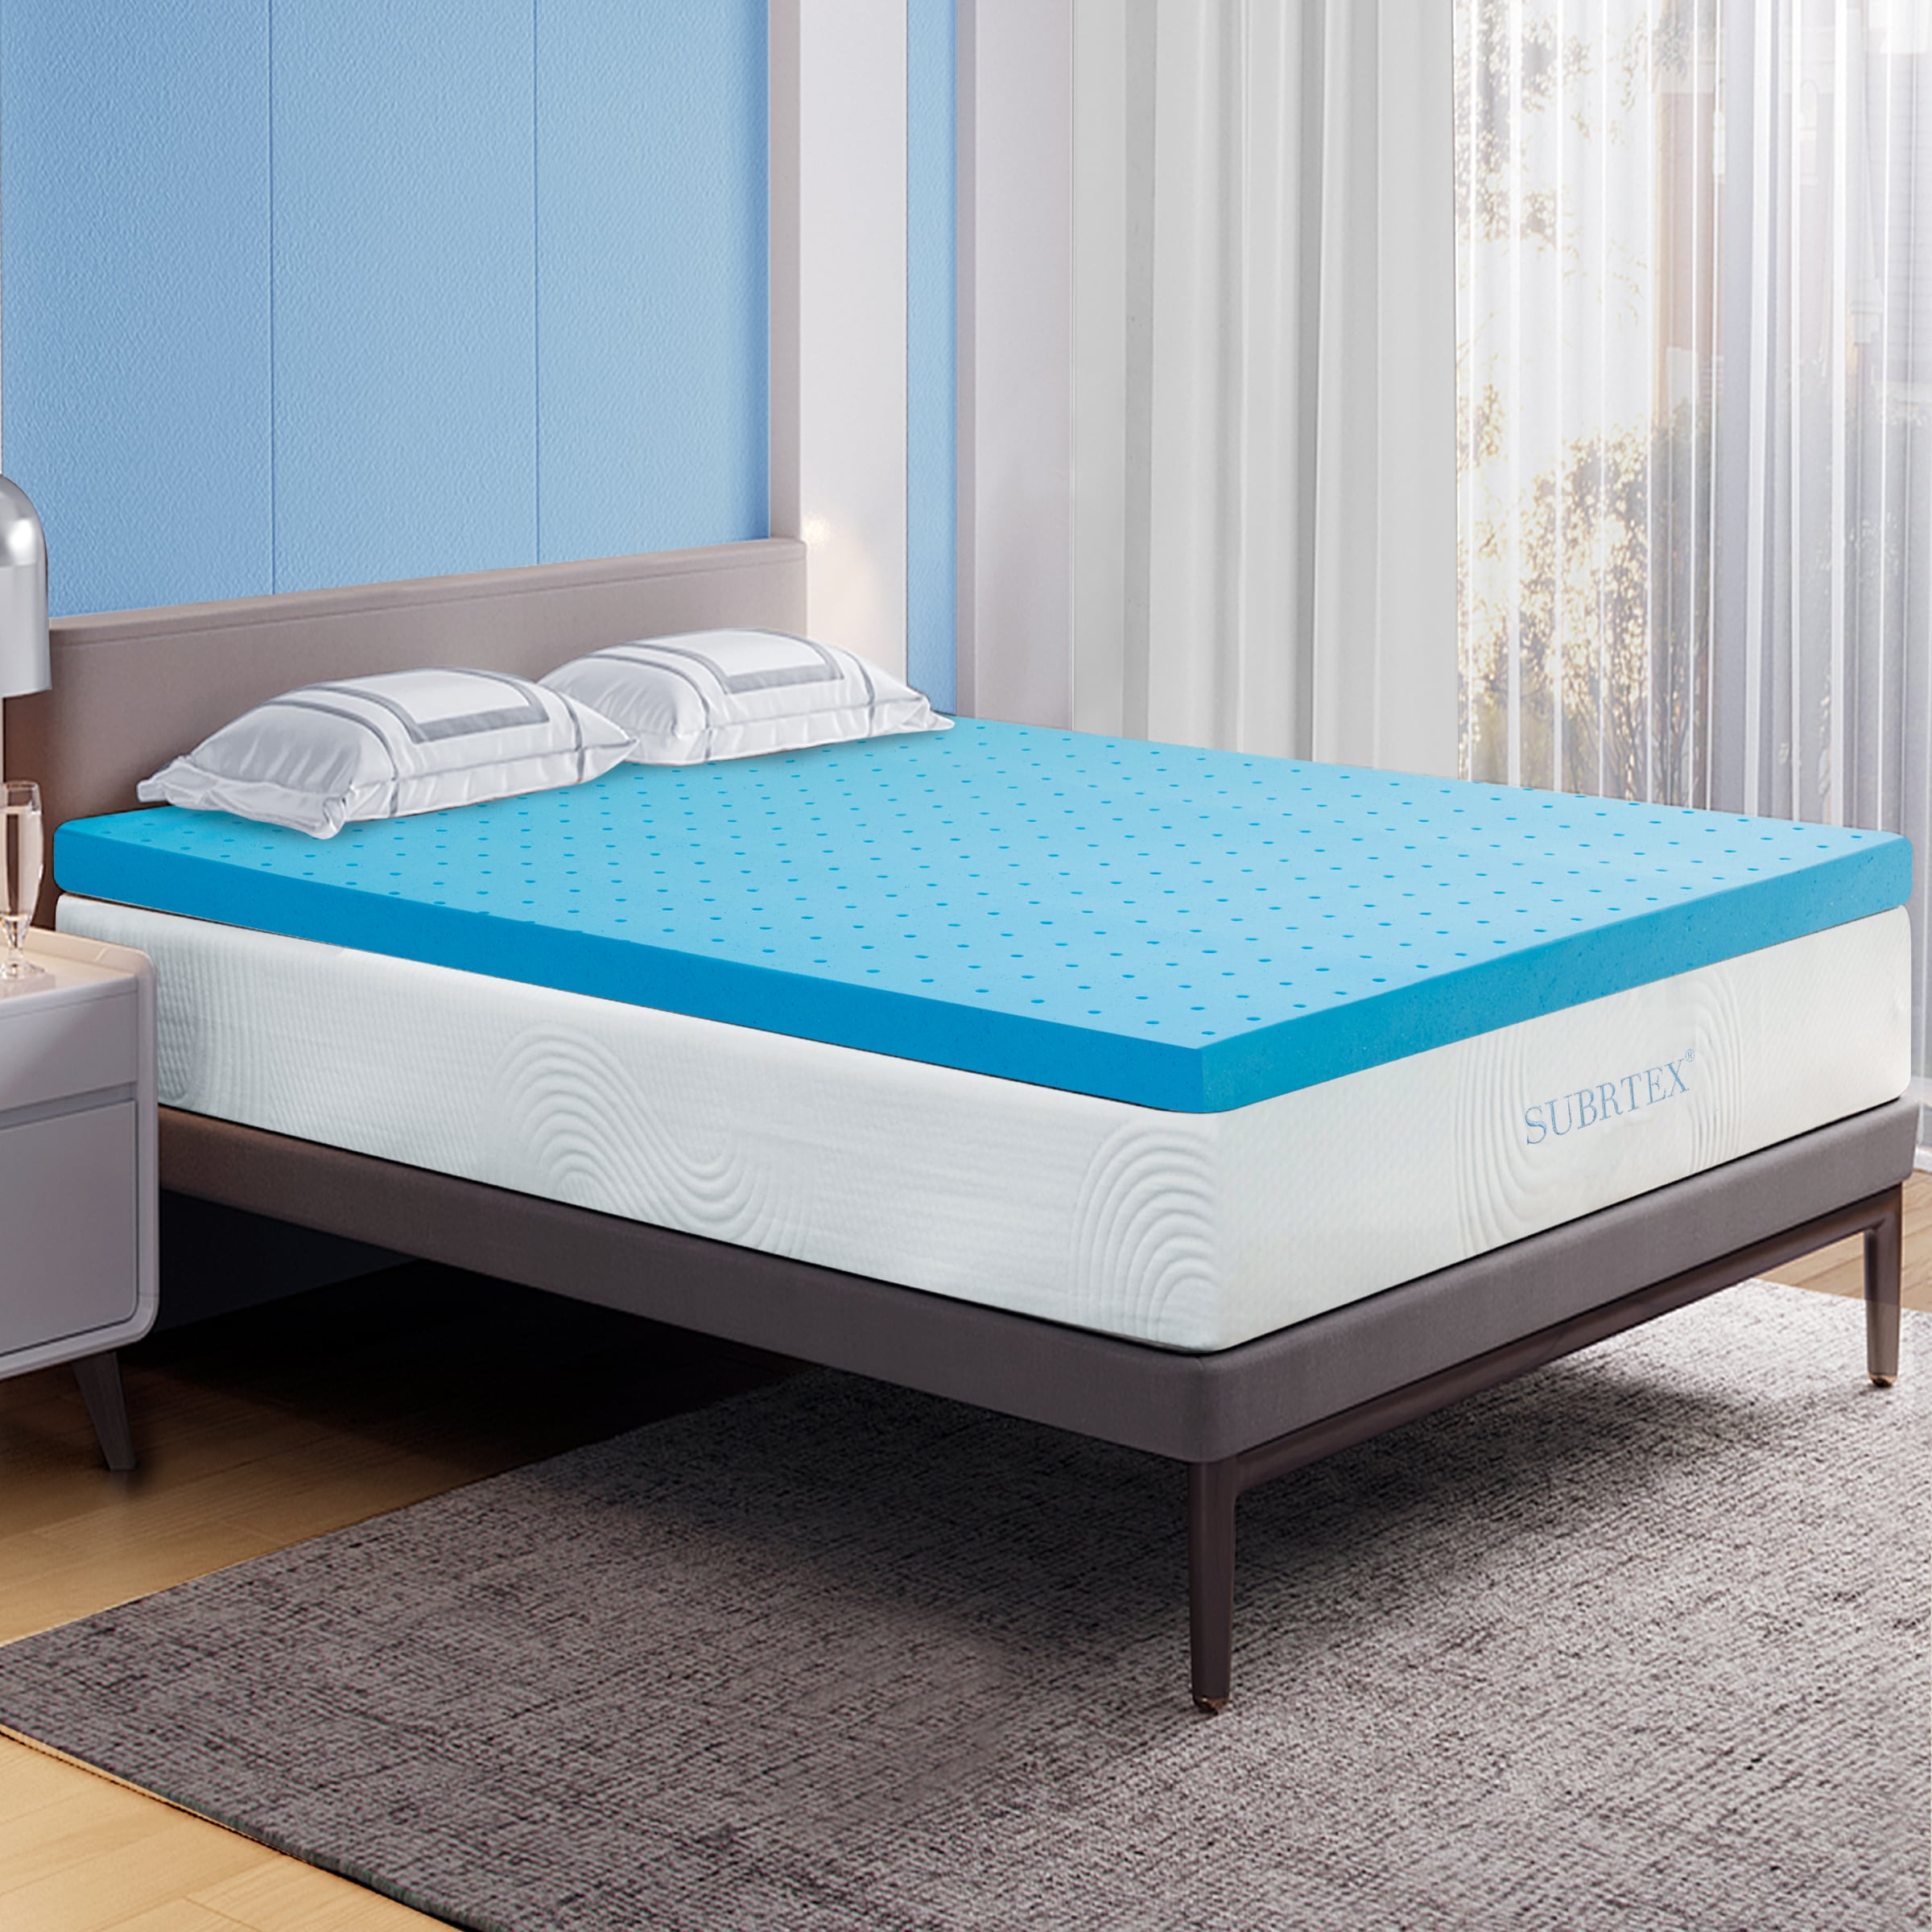 Tung lastbil Lappe tyngdekraft Subrtex High Density Cooling 3" Gel Memory Foam Mattress Topper (King) in  the Mattress Covers & Toppers department at Lowes.com